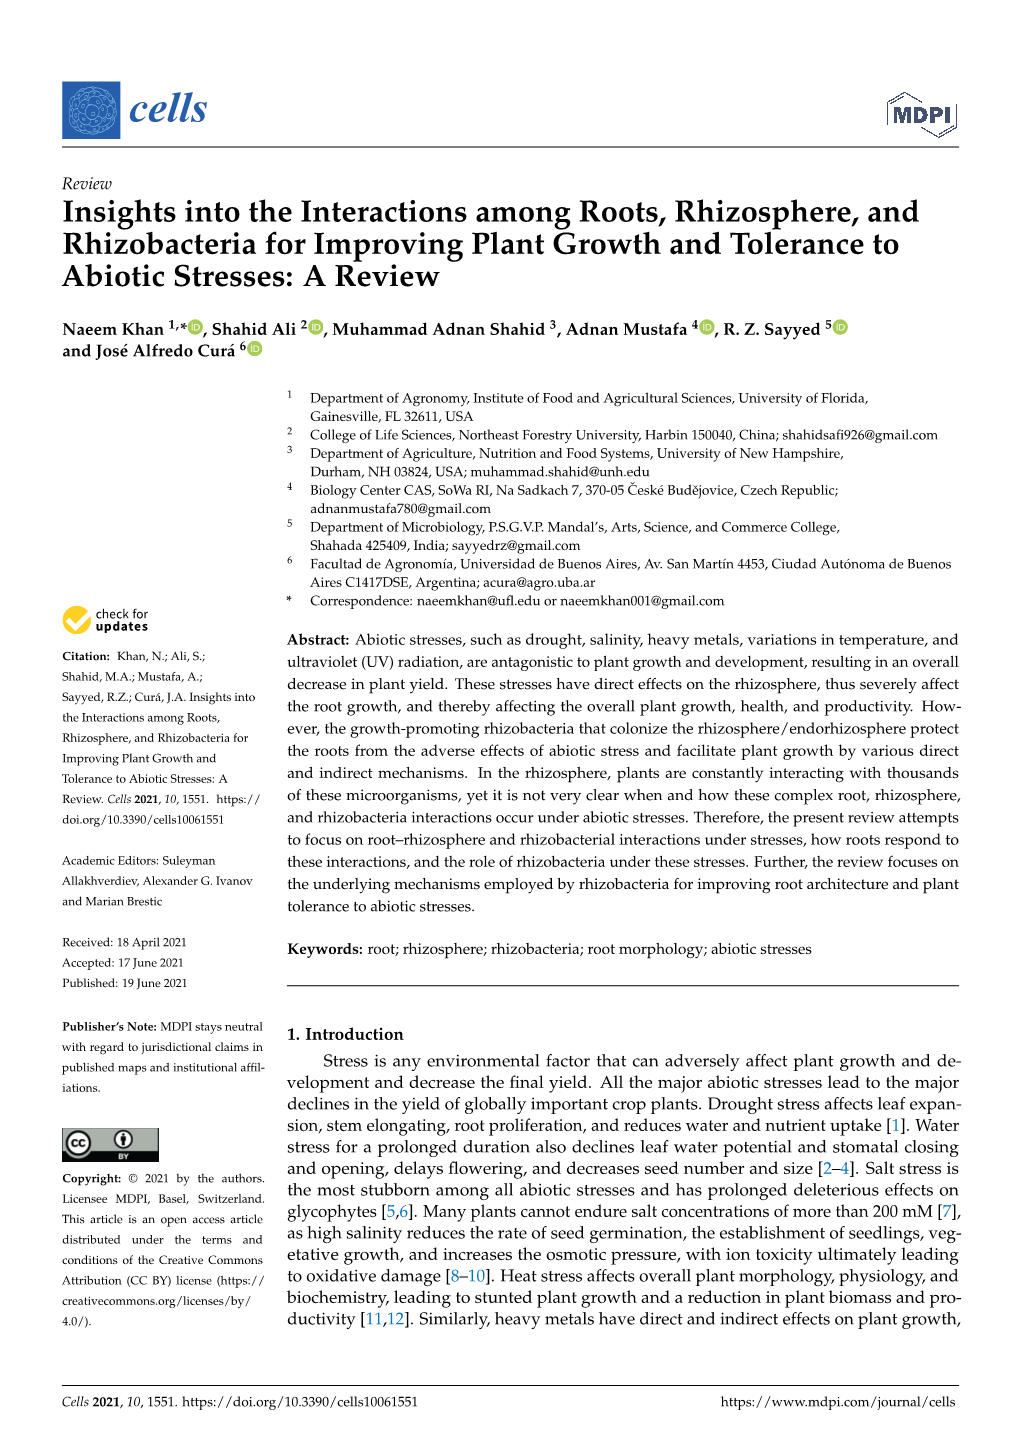 Insights Into the Interactions Among Roots, Rhizosphere, and Rhizobacteria for Improving Plant Growth and Tolerance to Abiotic Stresses: a Review